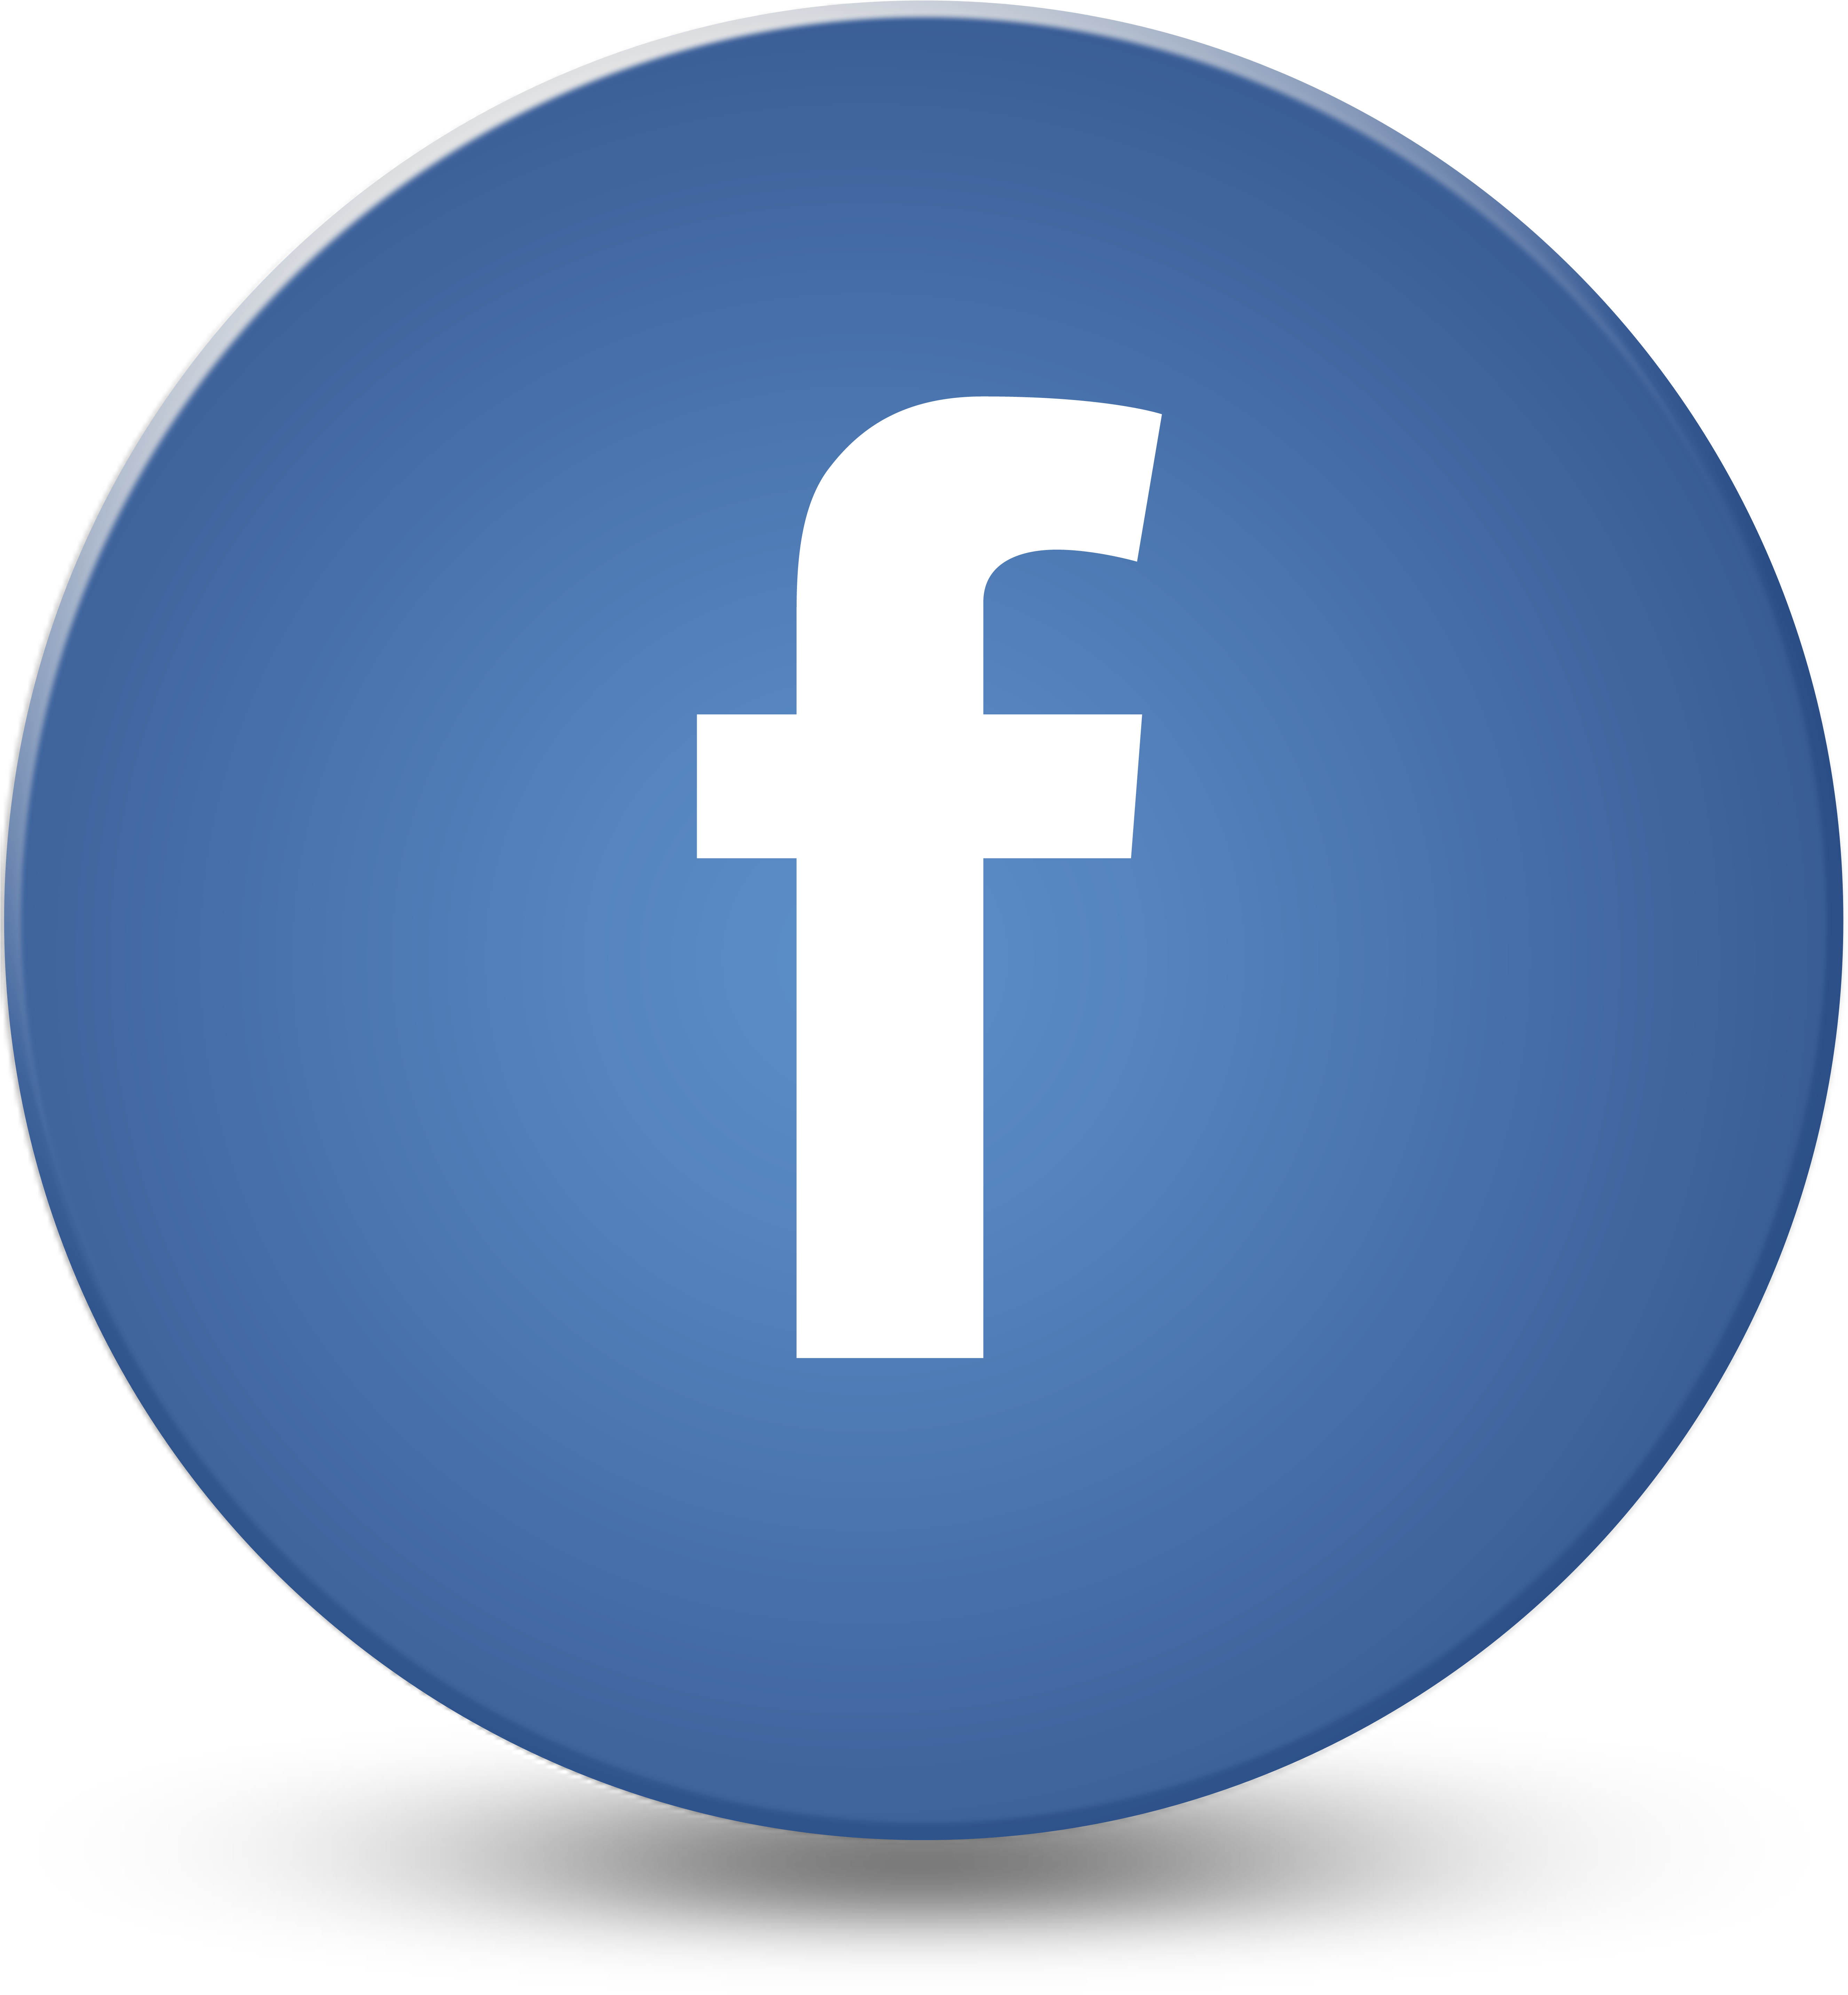 Round Facebook Logo Like Pictures To Pin On Pinterest.